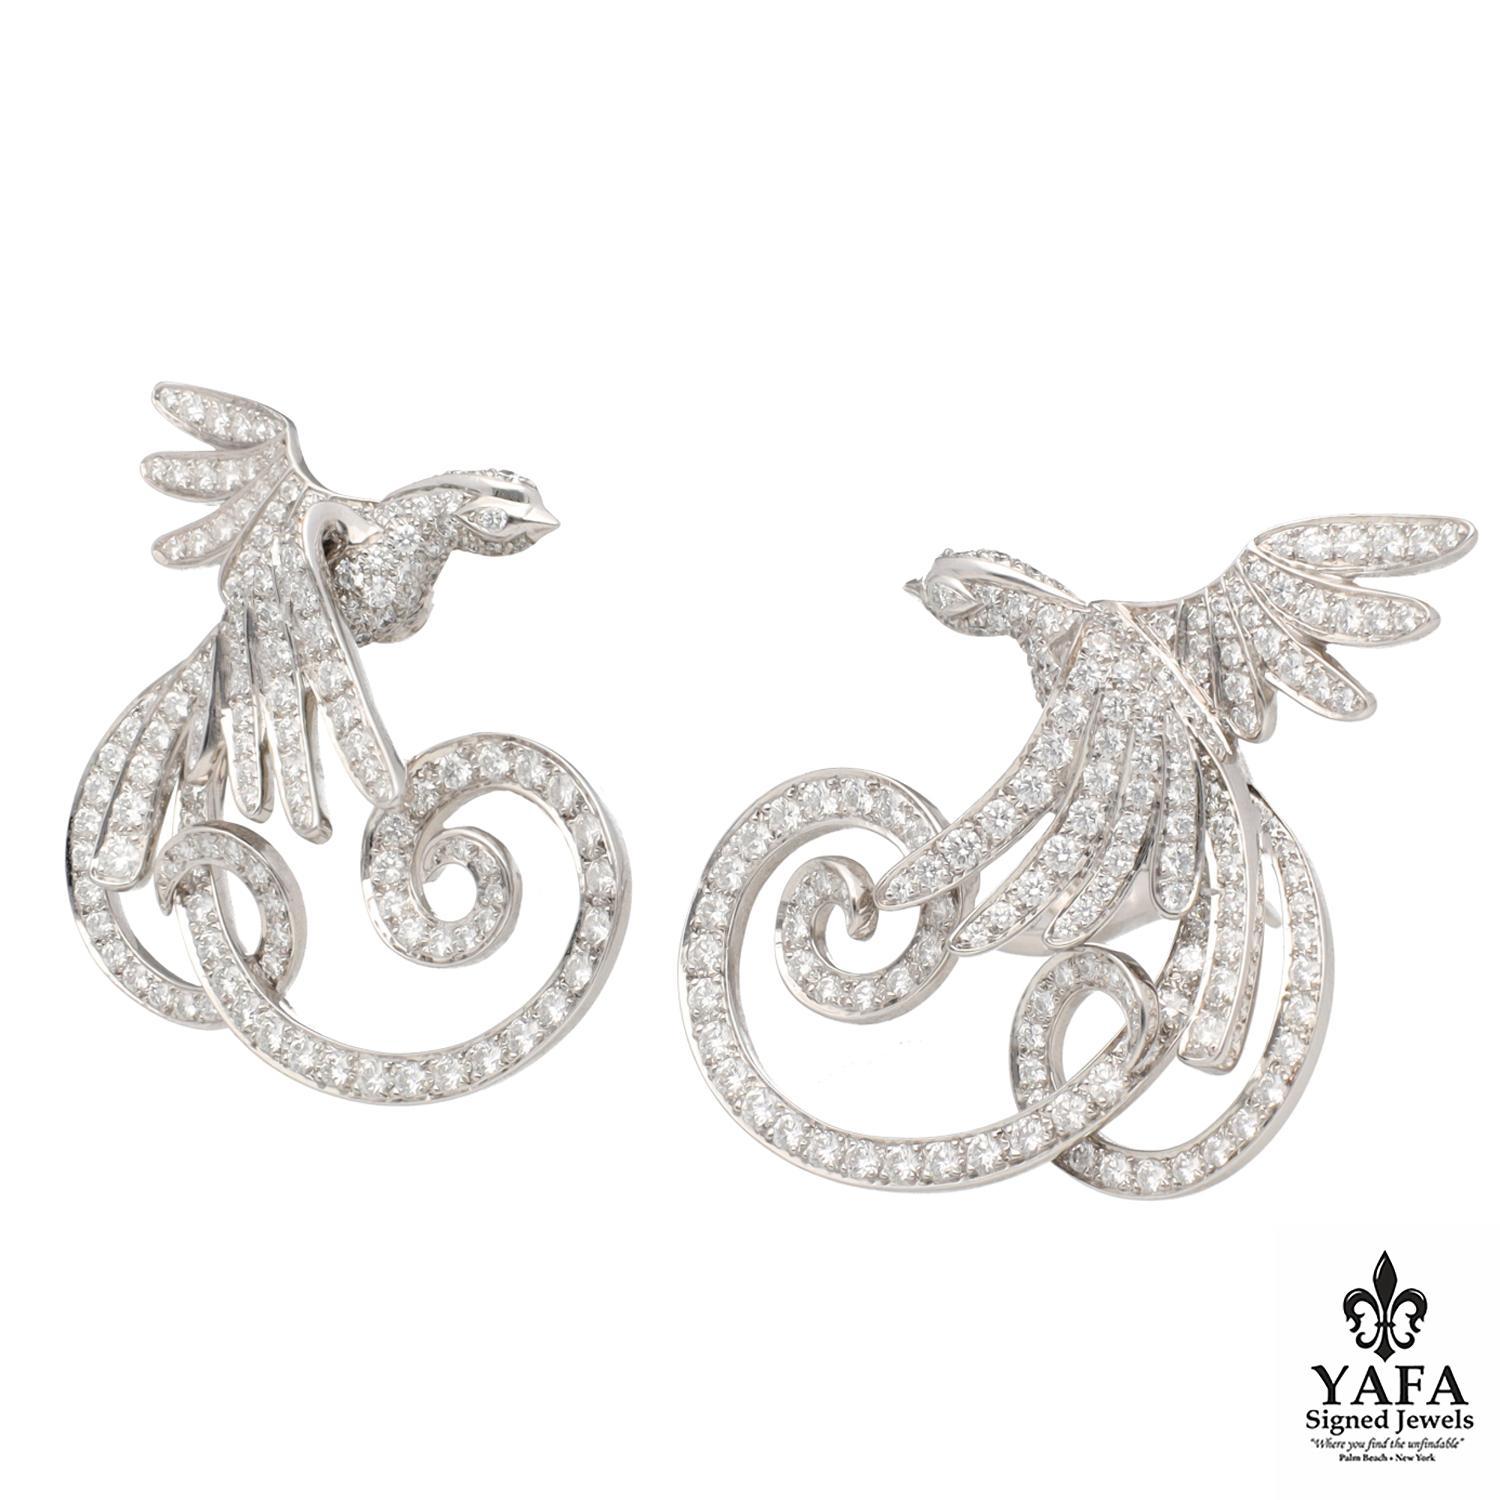 Van Cleef & Arpels Oiseaux de Paradis Earrings In Excellent Condition For Sale In New York, NY